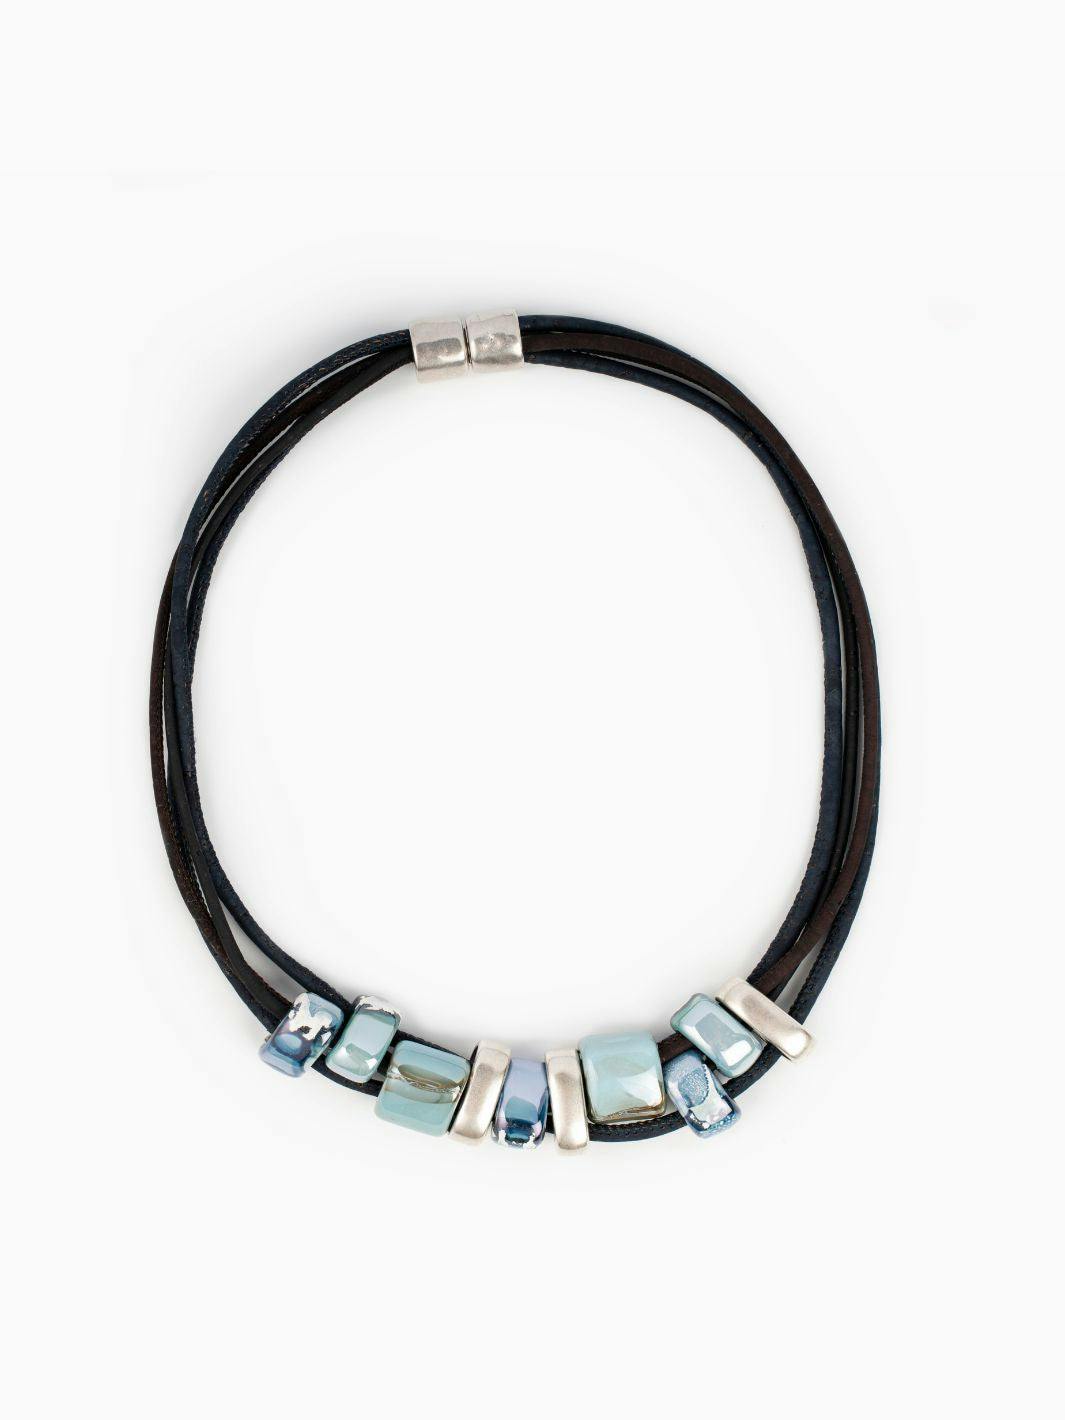 Oceans Necklace In Cork and Ceramic Stones, a product by FOReT®